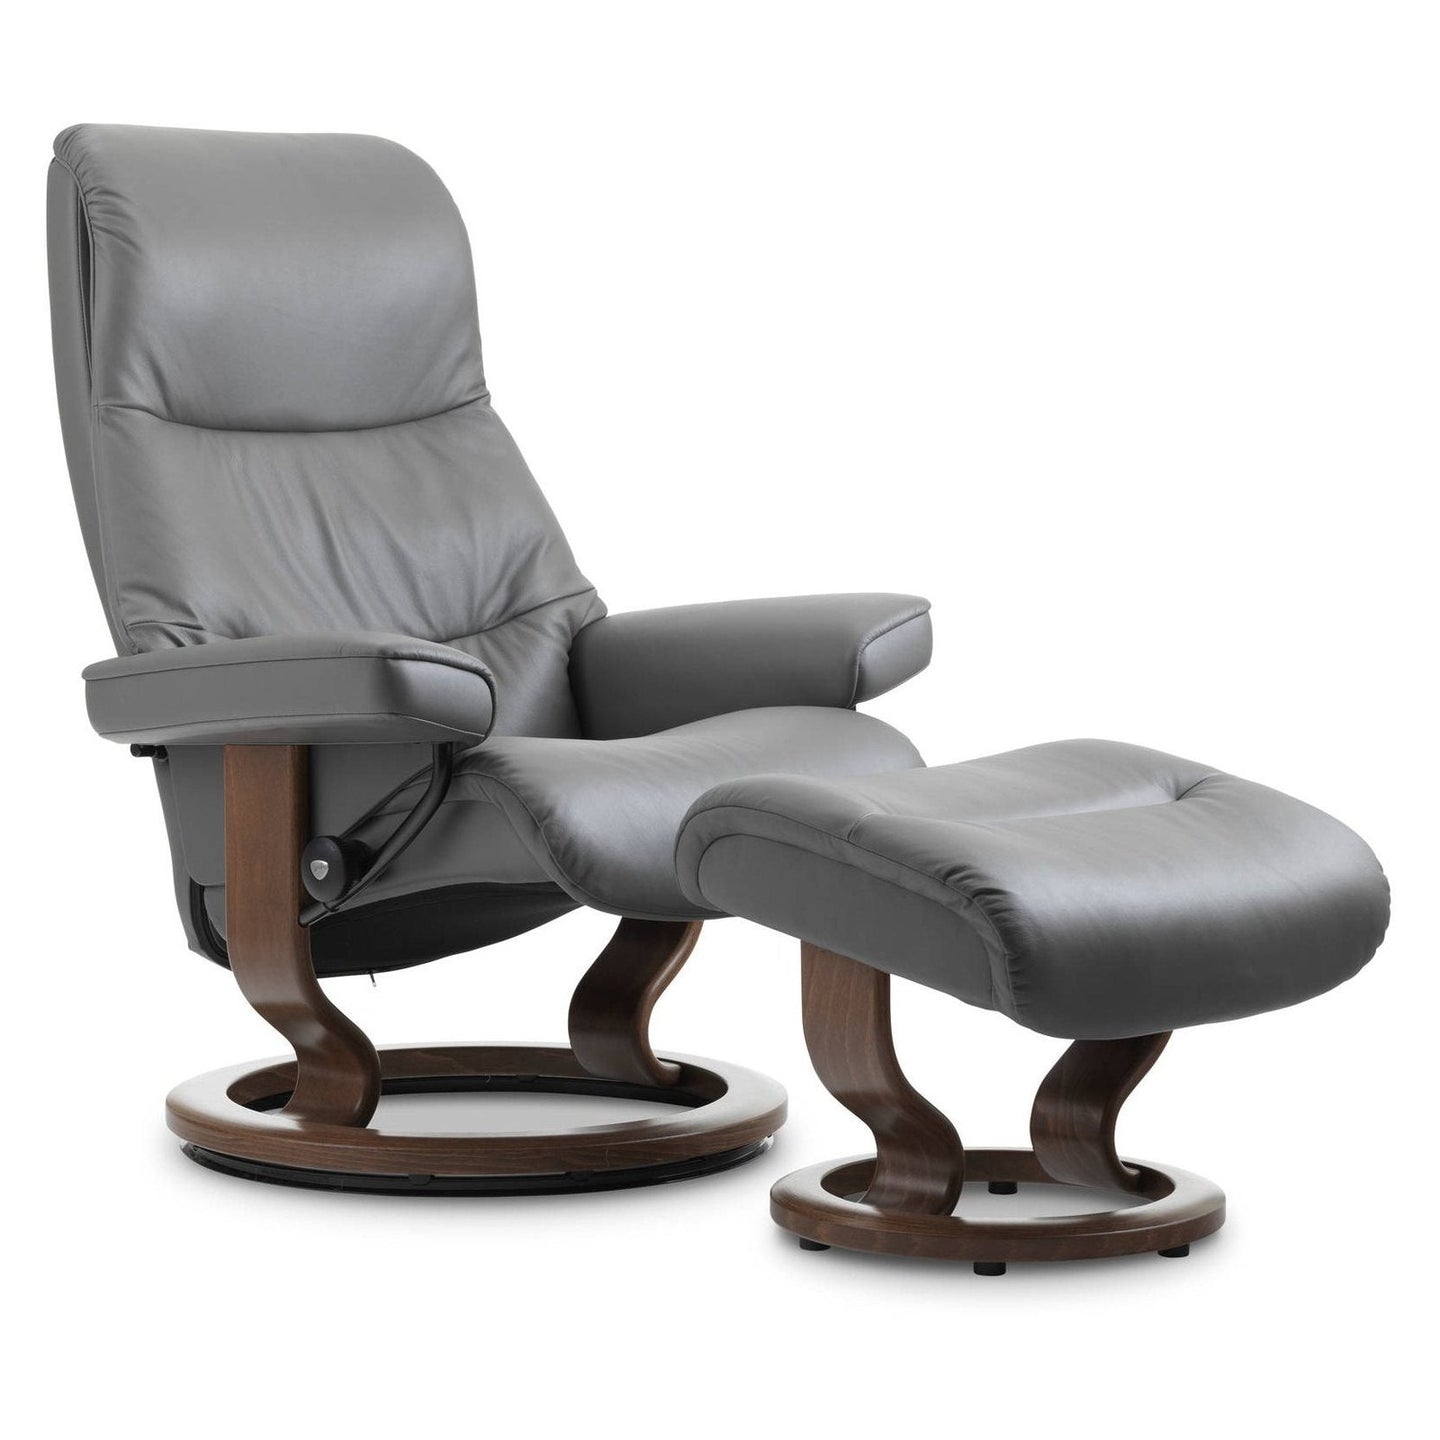 Stressless View Small Recliner with Footstool